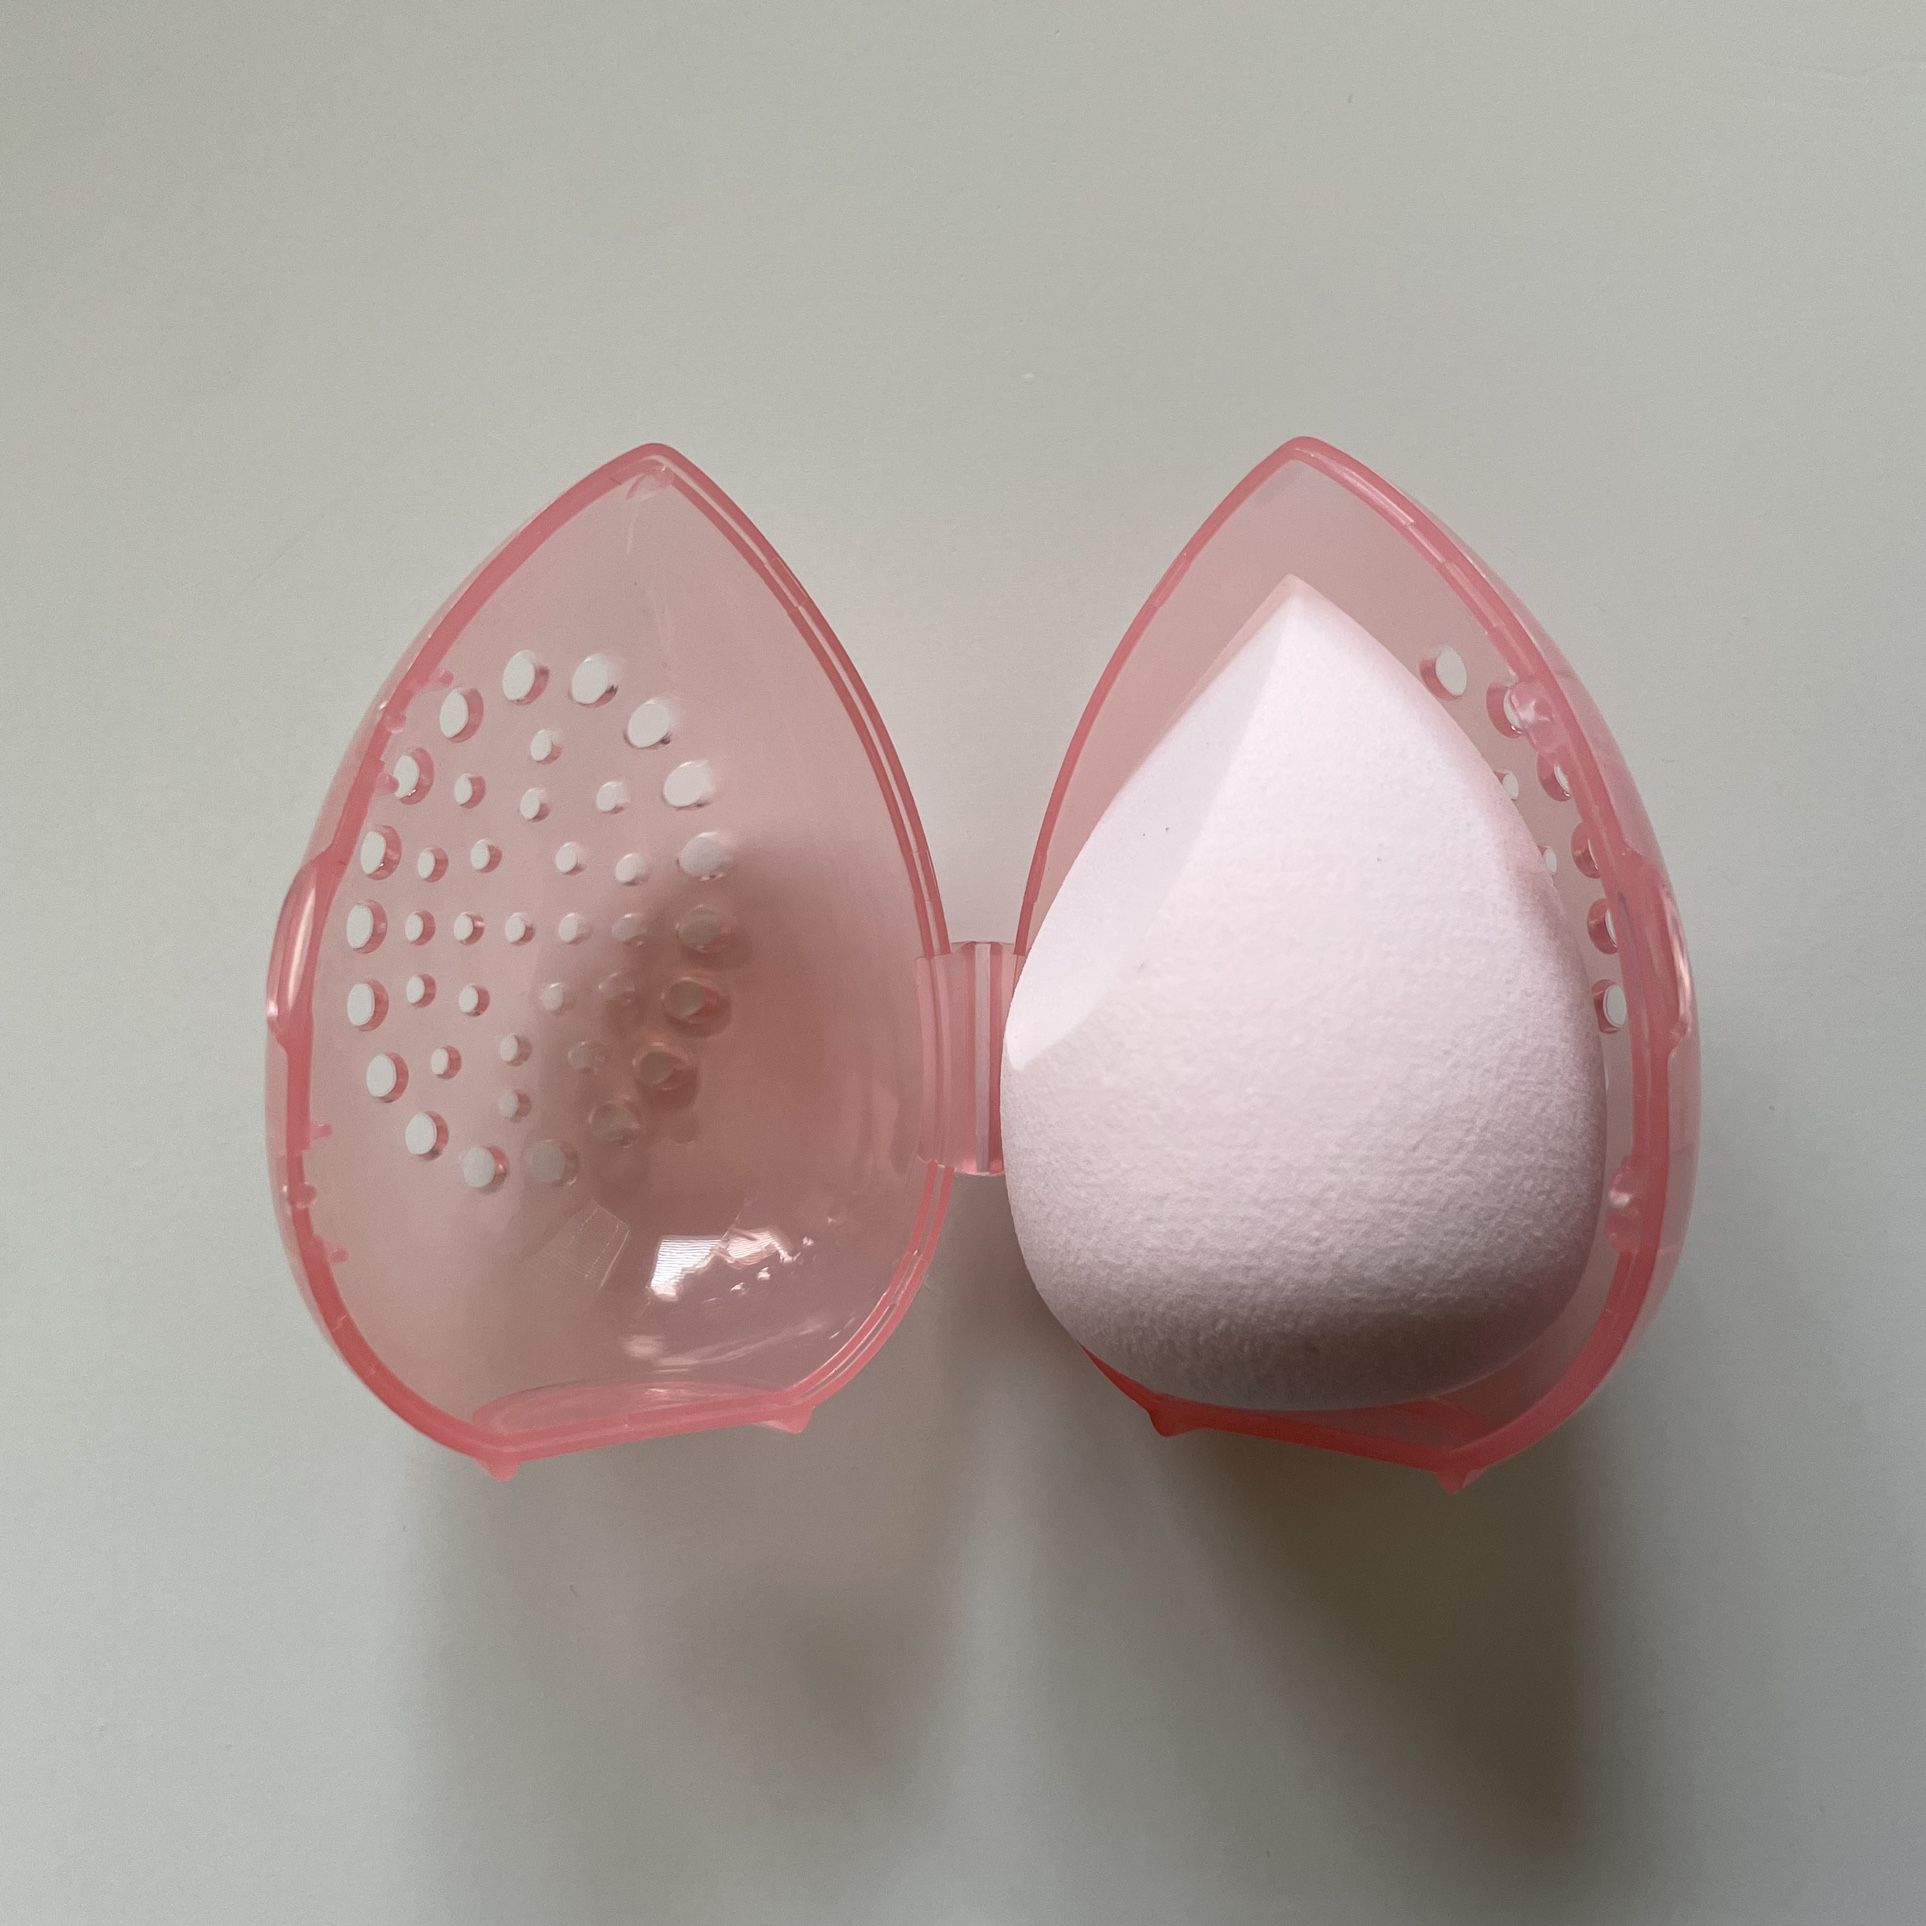 Makeup Beauty Blender Sponge With A Travel Carrying Case